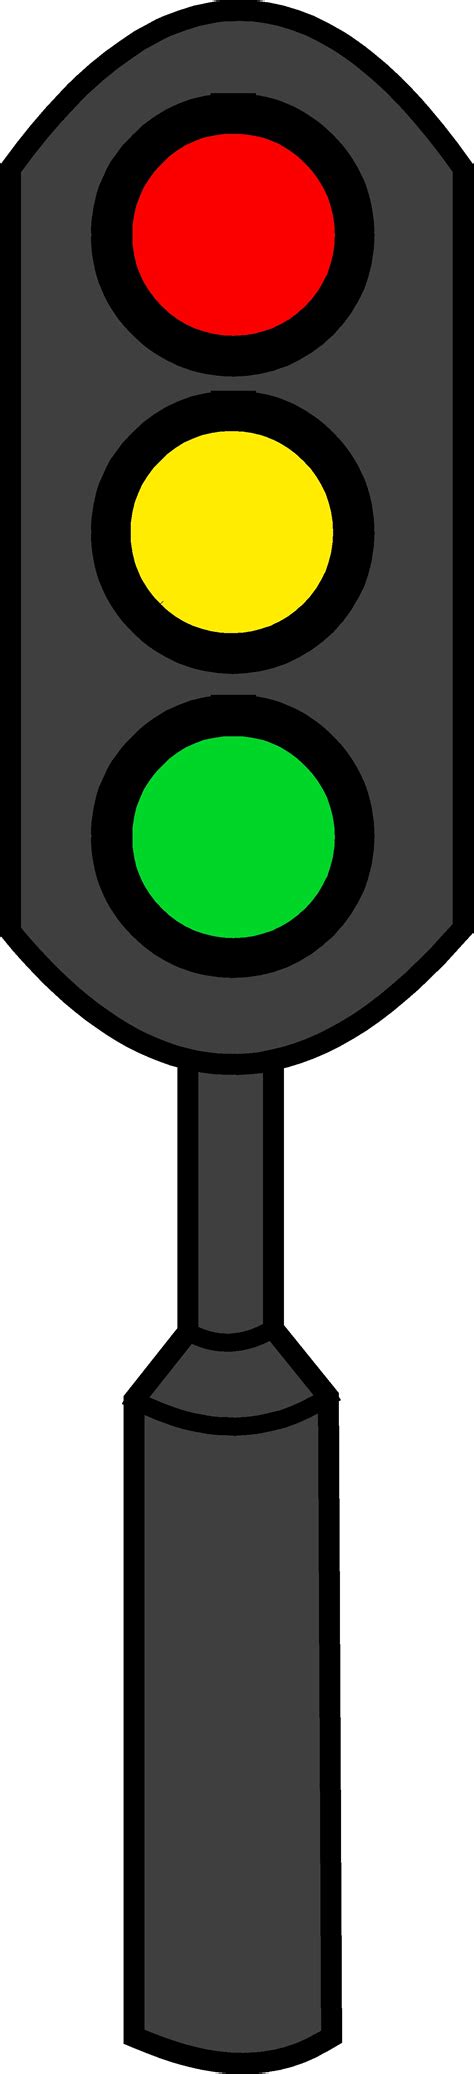 Traffic Light Clipart At Getdrawings Free Download